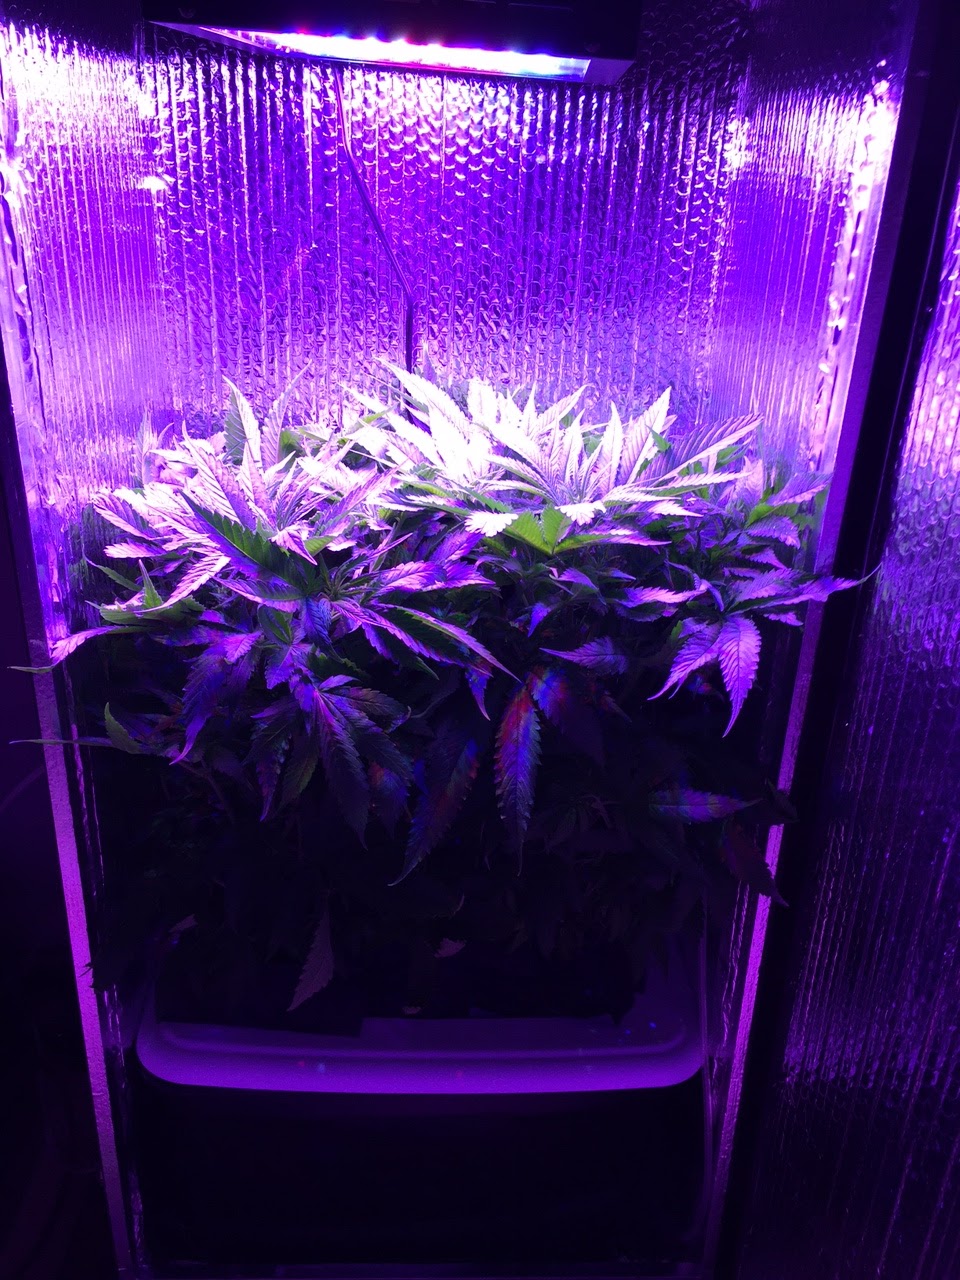 New 4 Foot Grow Cabinets For Sale 2015